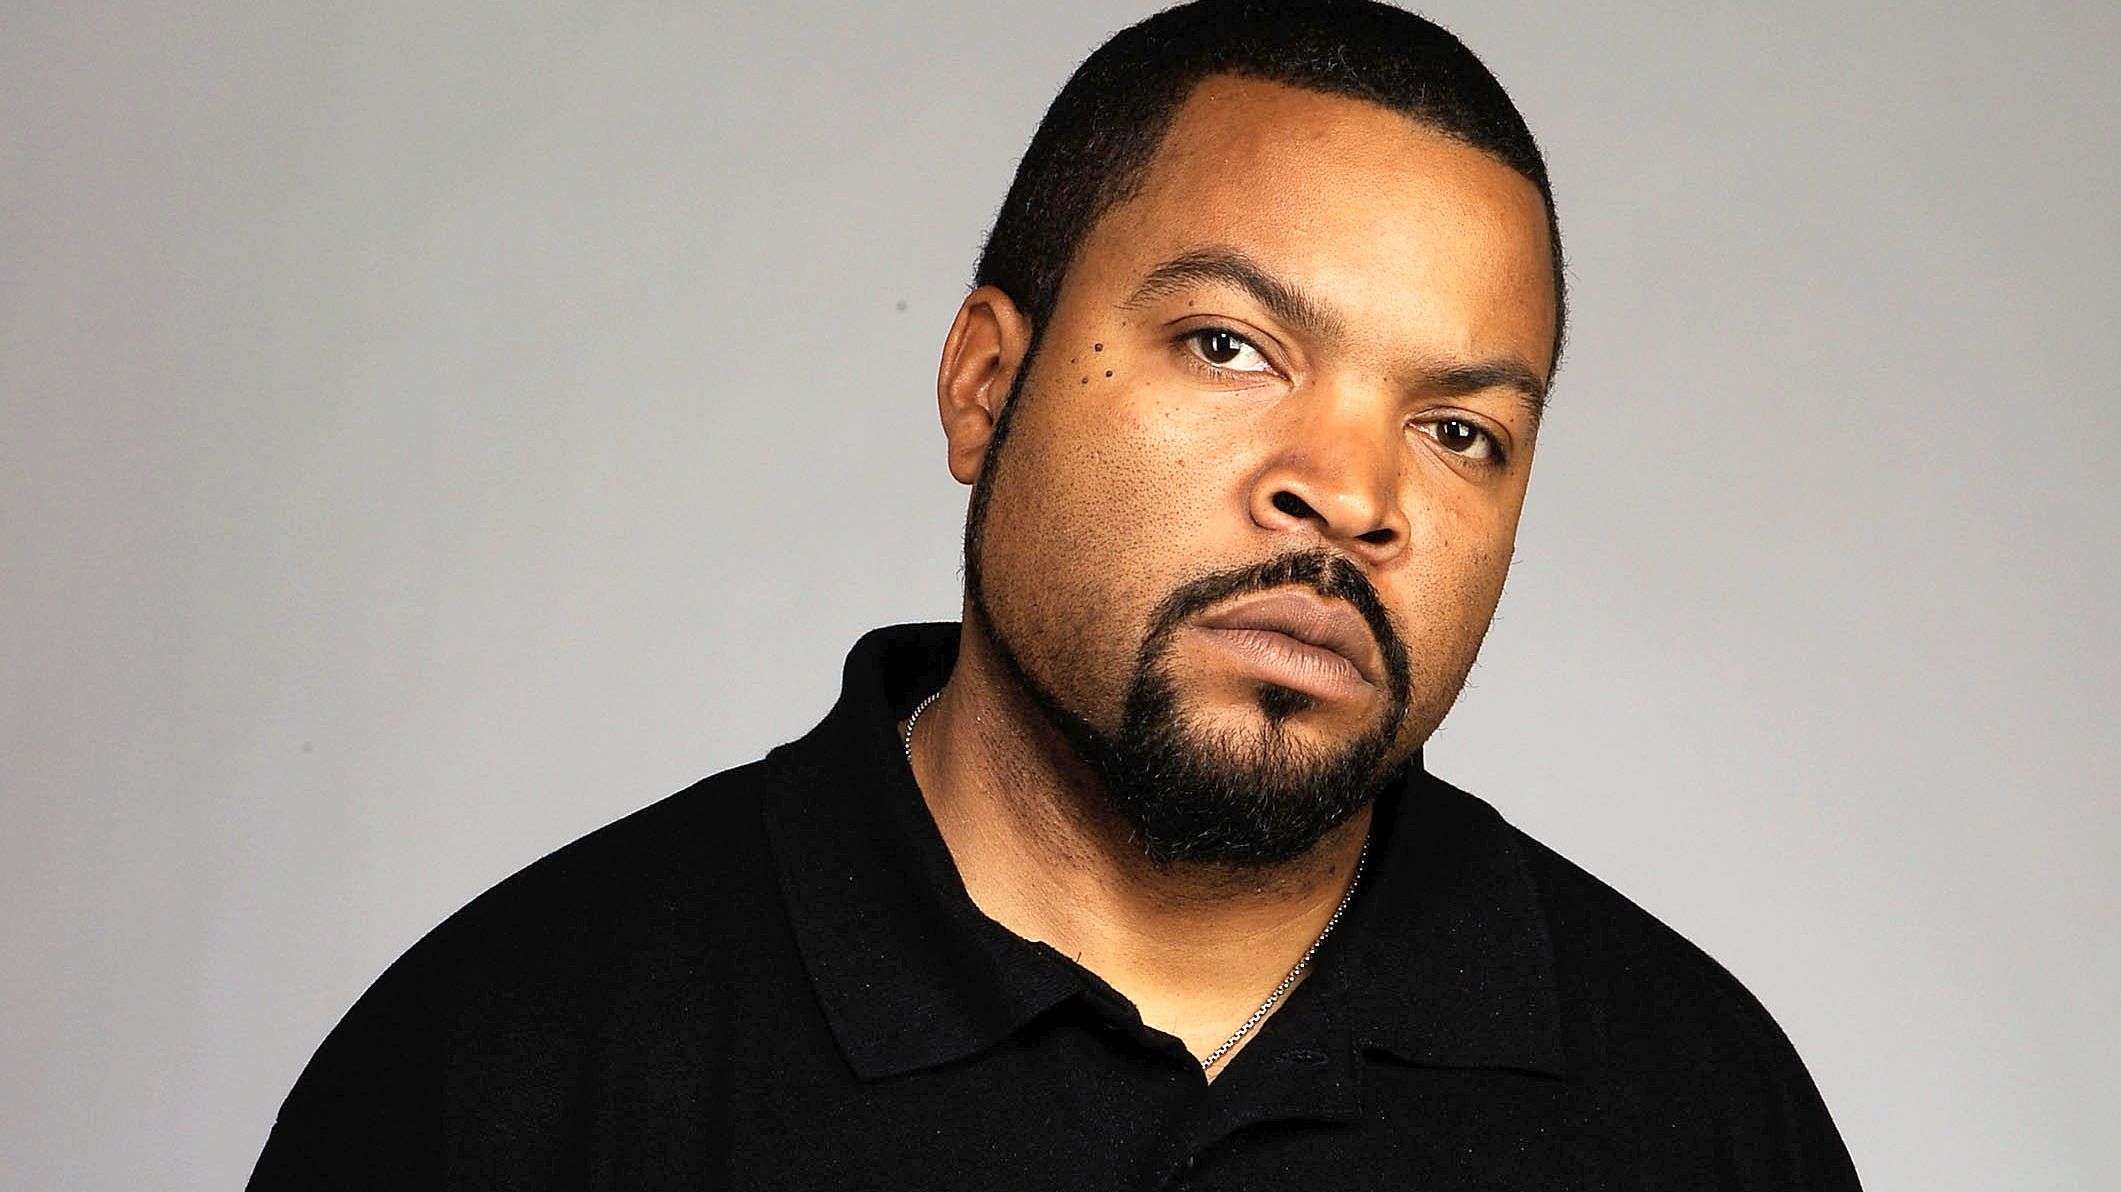 Ice Cube Arena Pile Top 10 Richest Black Actors In The World 2018